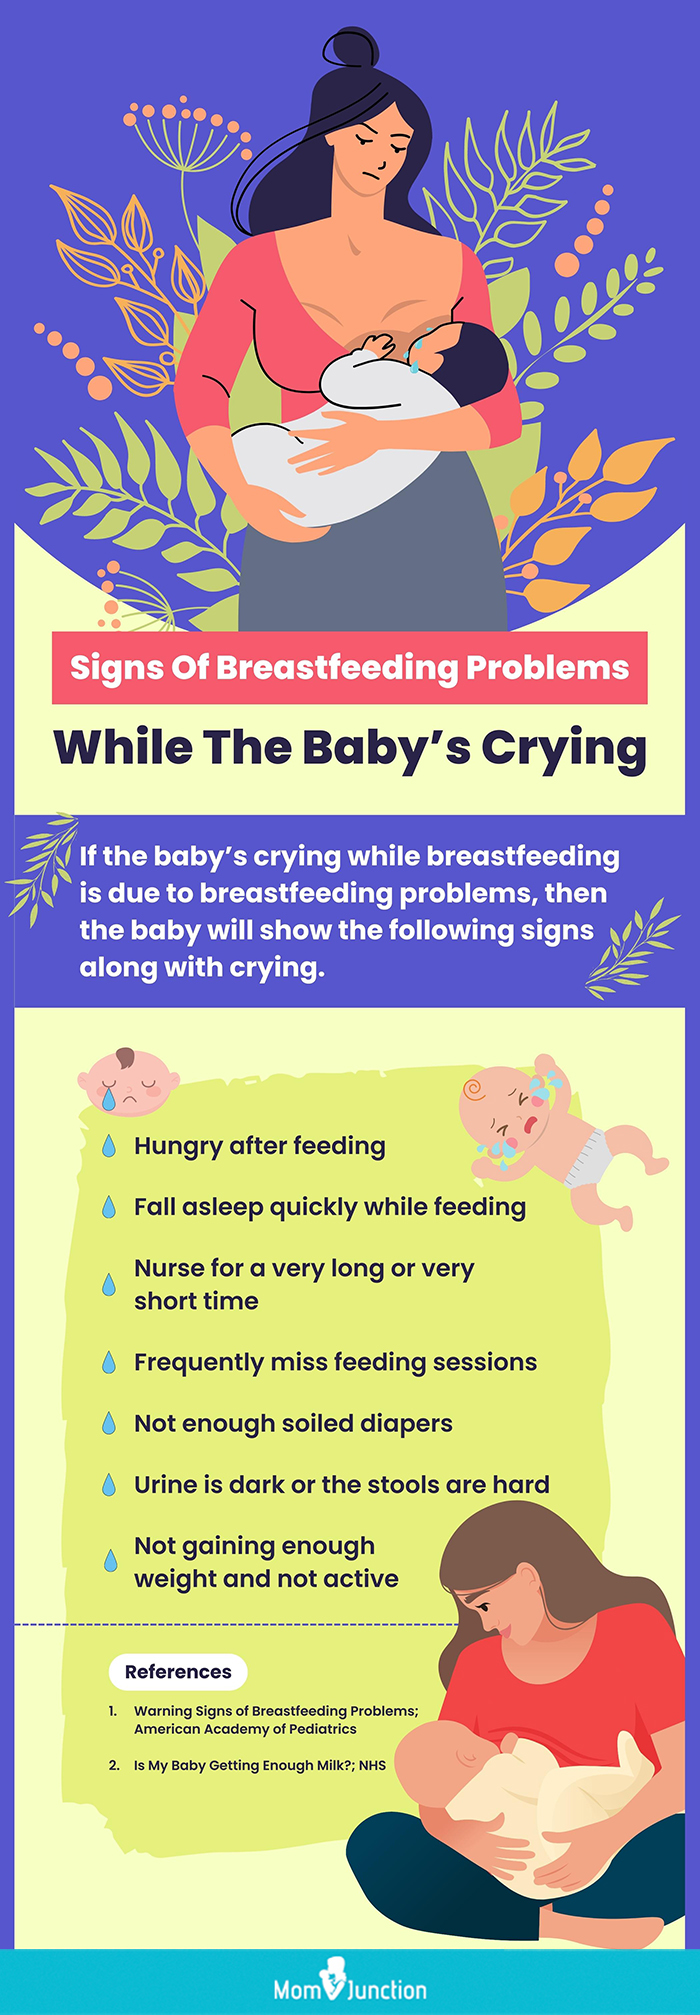 https://www.momjunction.com/wp-content/uploads/2022/10/Infographic-Signs-To-Watch-Out-For-With-Baby-Crying-While-Breastfeeding.jpg